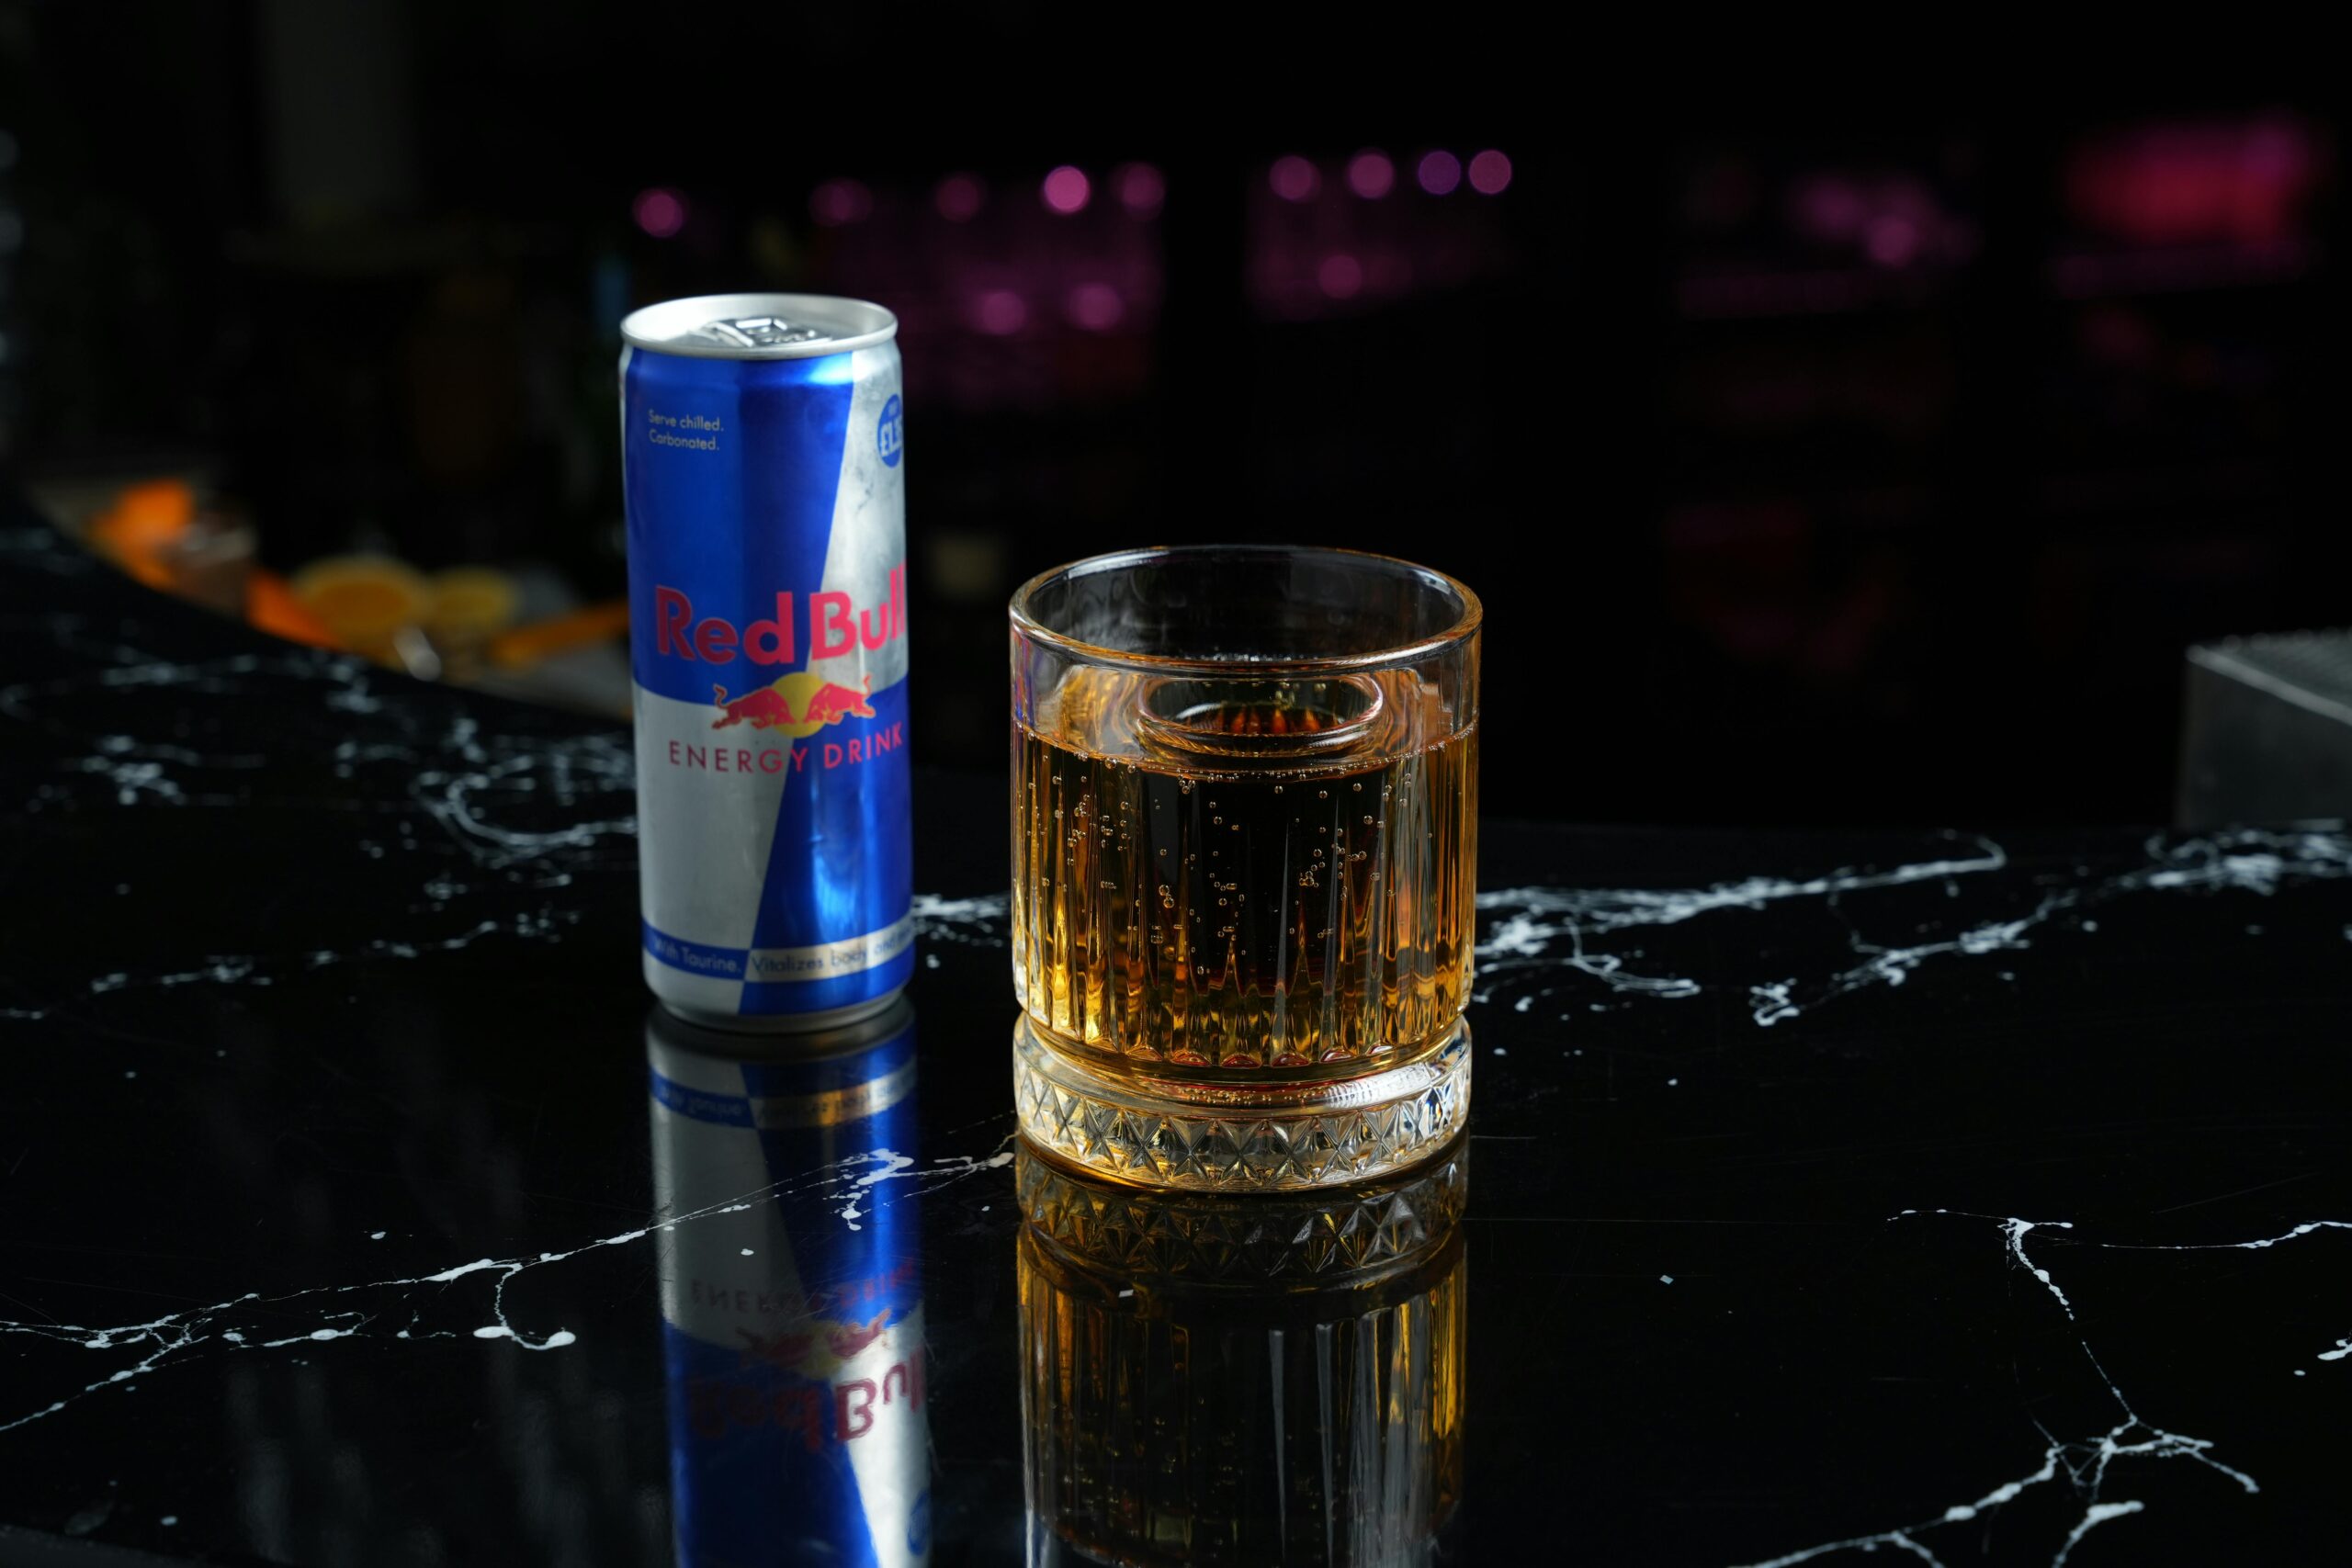 Tequila and Red Bull